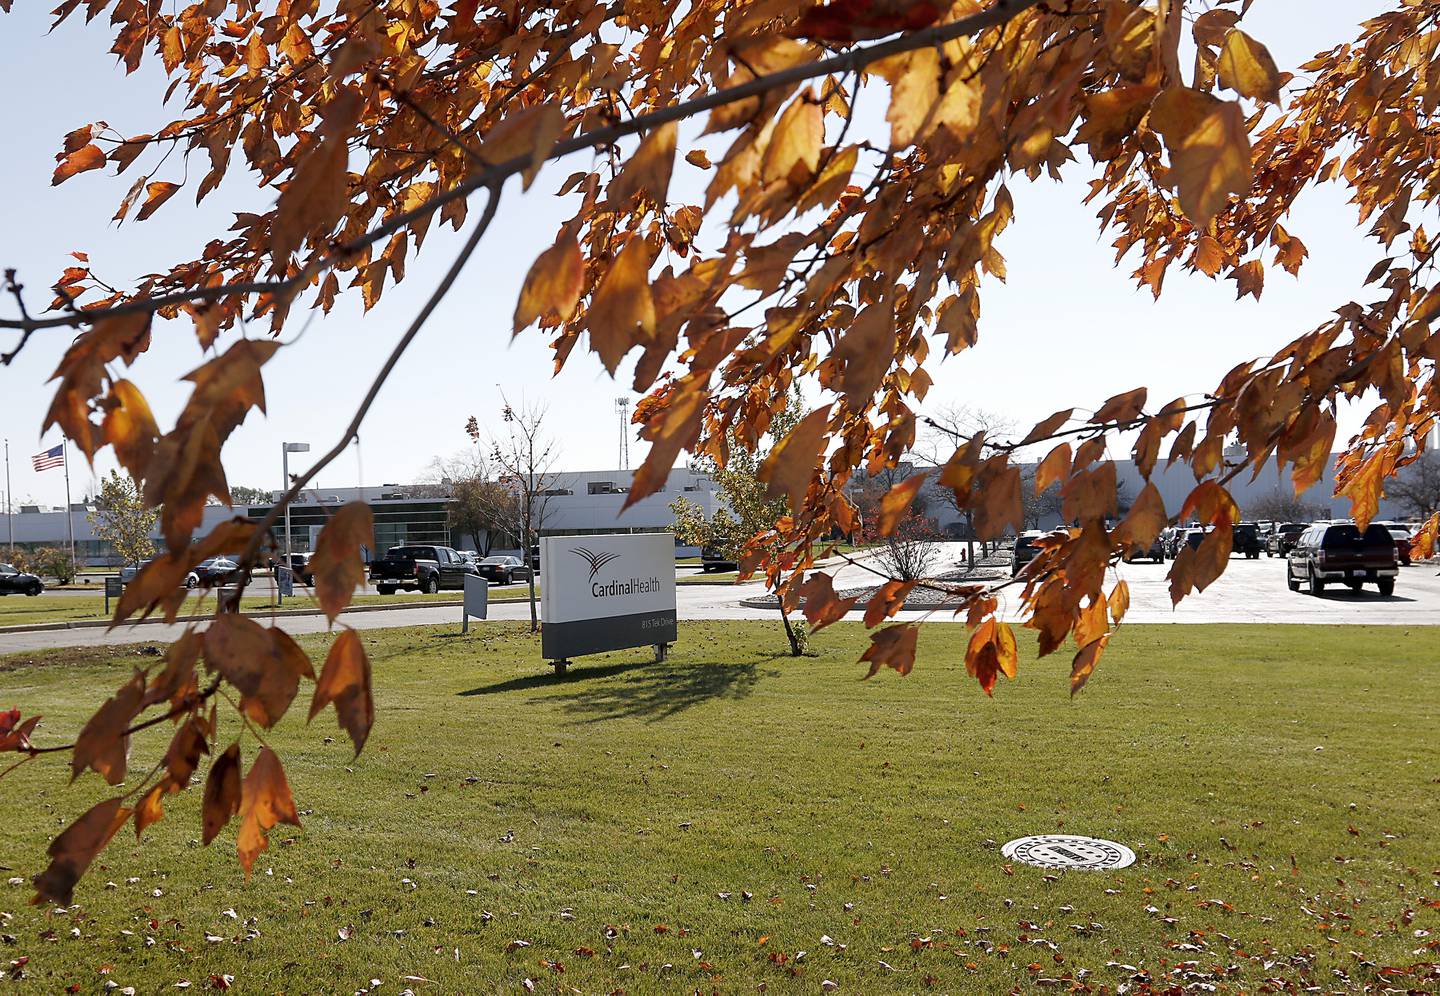 Cardinal Health on Tuesday Nov. 1, 2022. The company filed a Worker Adjustment and Retraining Notification, or WARN, Act notice that it planed to lay off 236 people at the facility at 815 Tek Drive in Crystal Lake starting Dec. 31, but city officials said a lease with a new company should save those jobs.